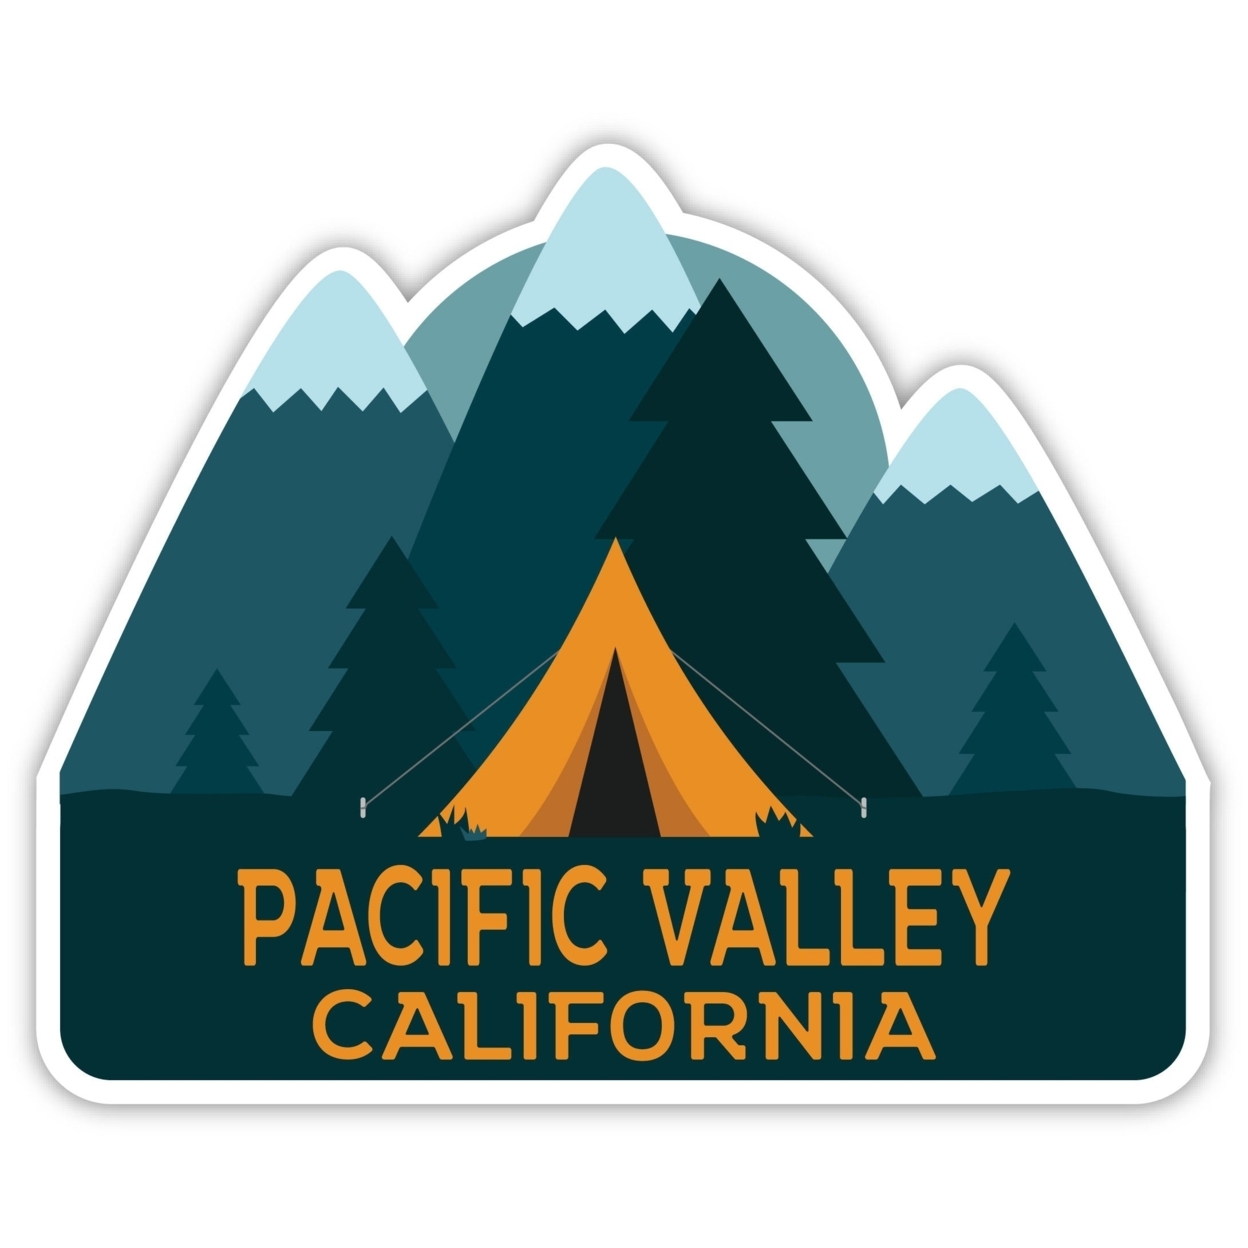 Pacific Valley California Souvenir Decorative Stickers (Choose Theme And Size) - Single Unit, 4-Inch, Tent